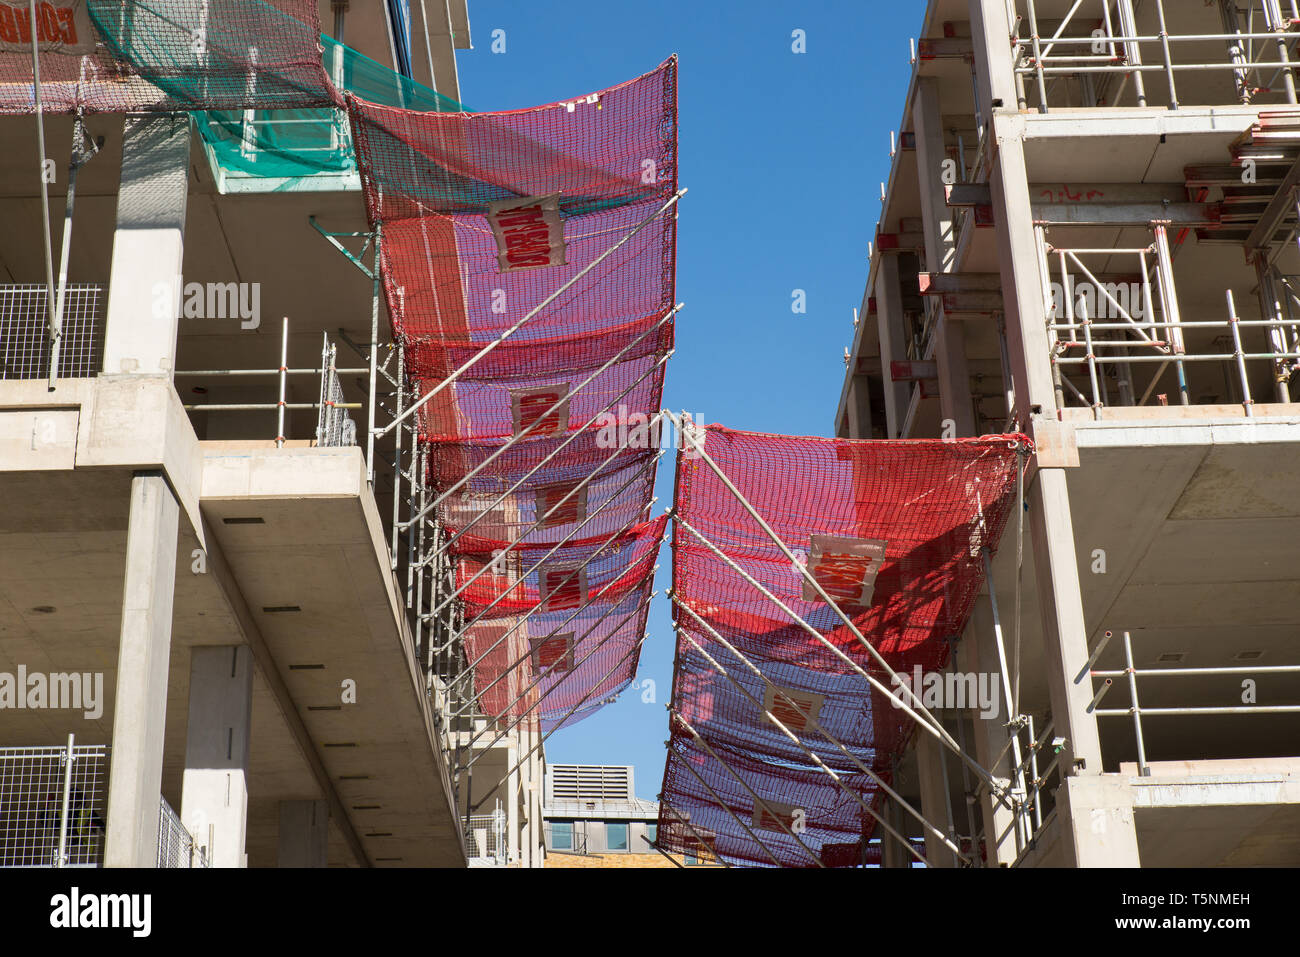 Fall arrest safety nets on a building under construction, London. Stock Photo